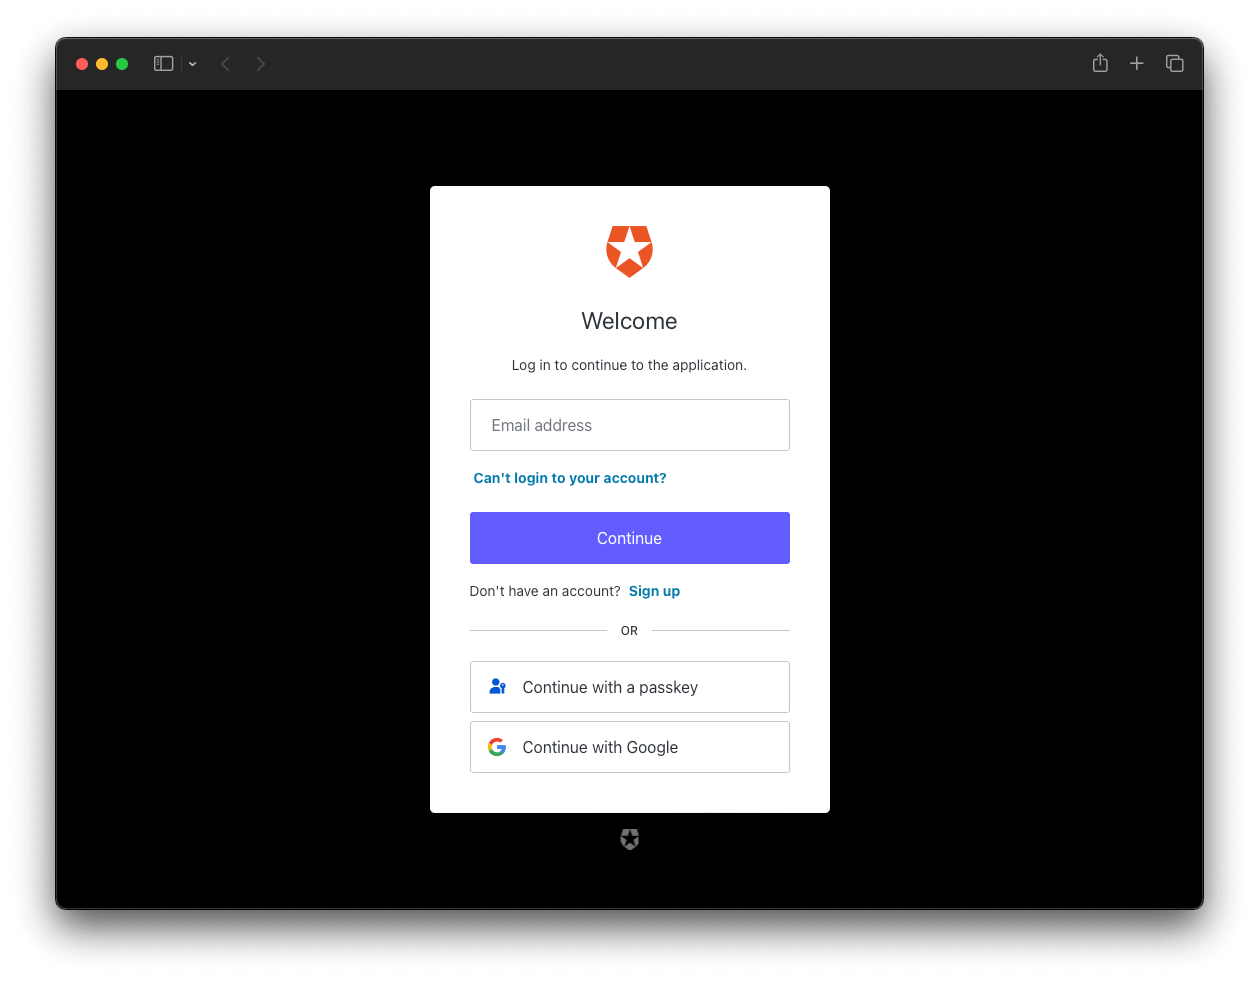 The Auth0 Universal Login page now shows an option to log in using a passkey